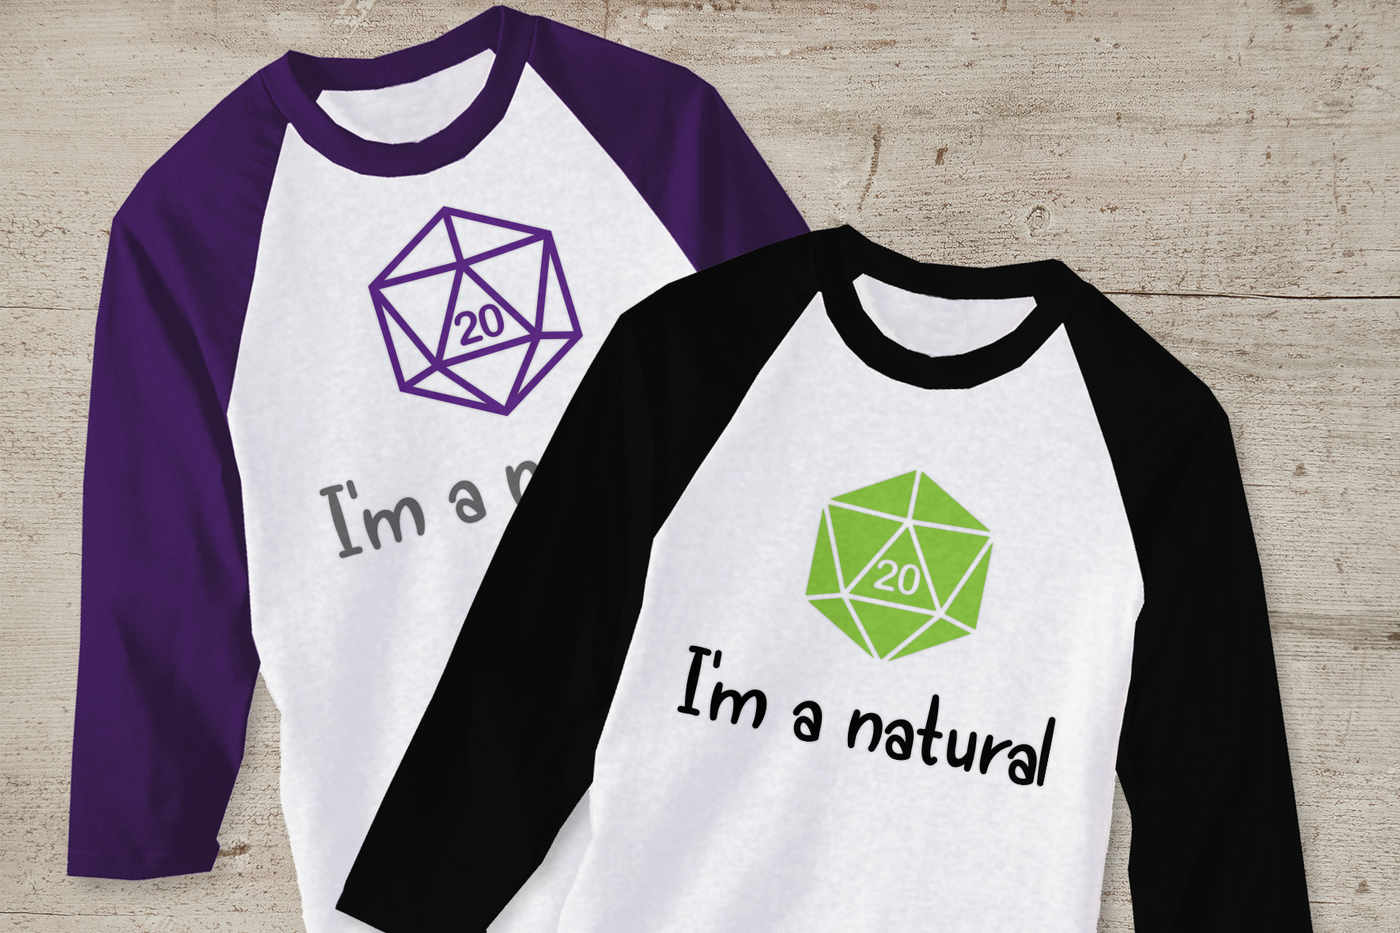 Two raglan tees. Each says "I'm a natural" with a D20 showing the number 20 above.